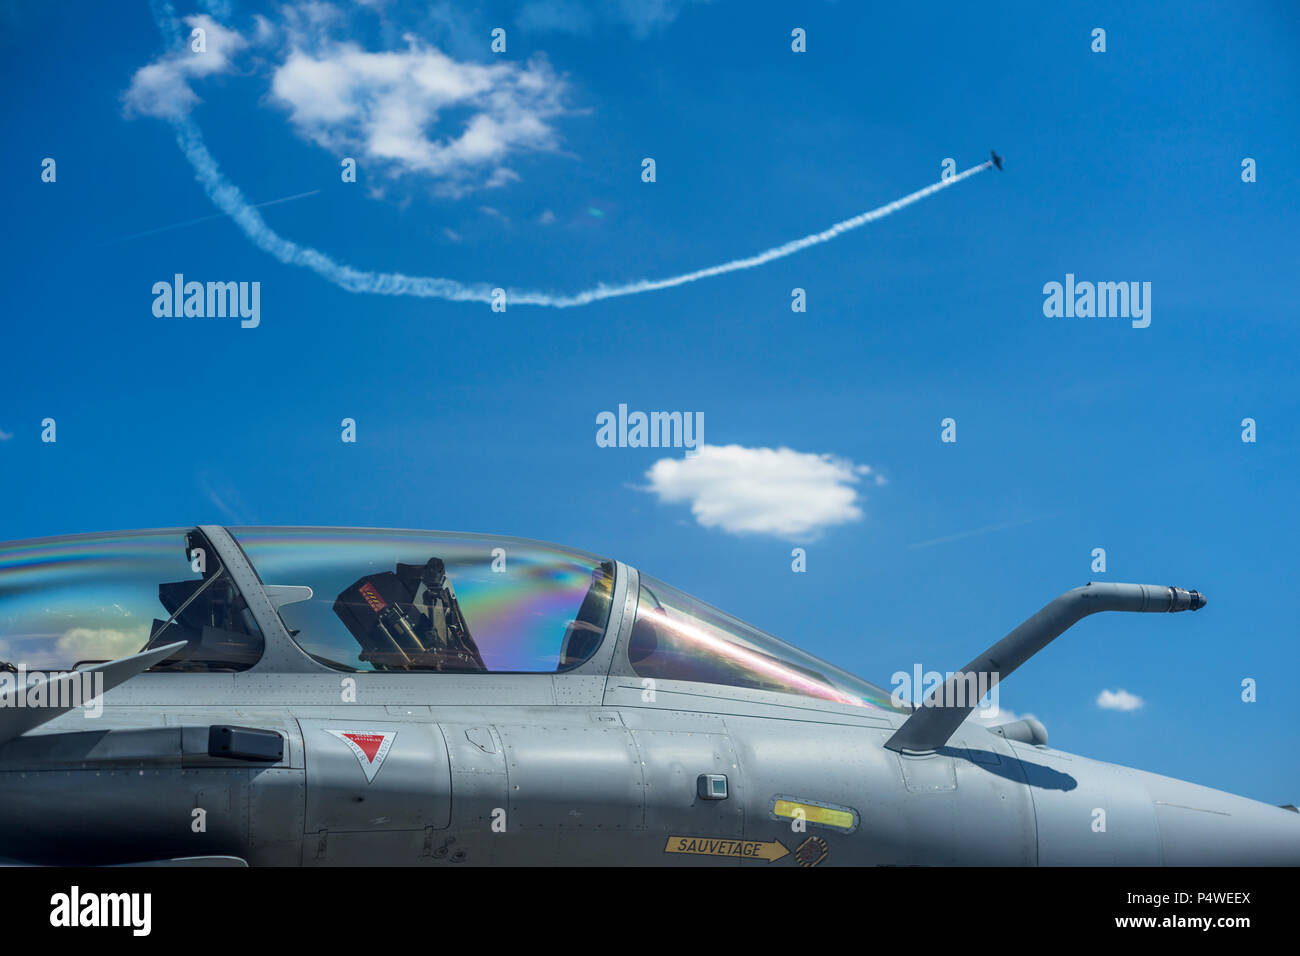 A Dassault Rafale at the display of the International Aerospace Exhibition ILA at airport Schoenefeld in Berlin, Germany 2018. Stock Photo